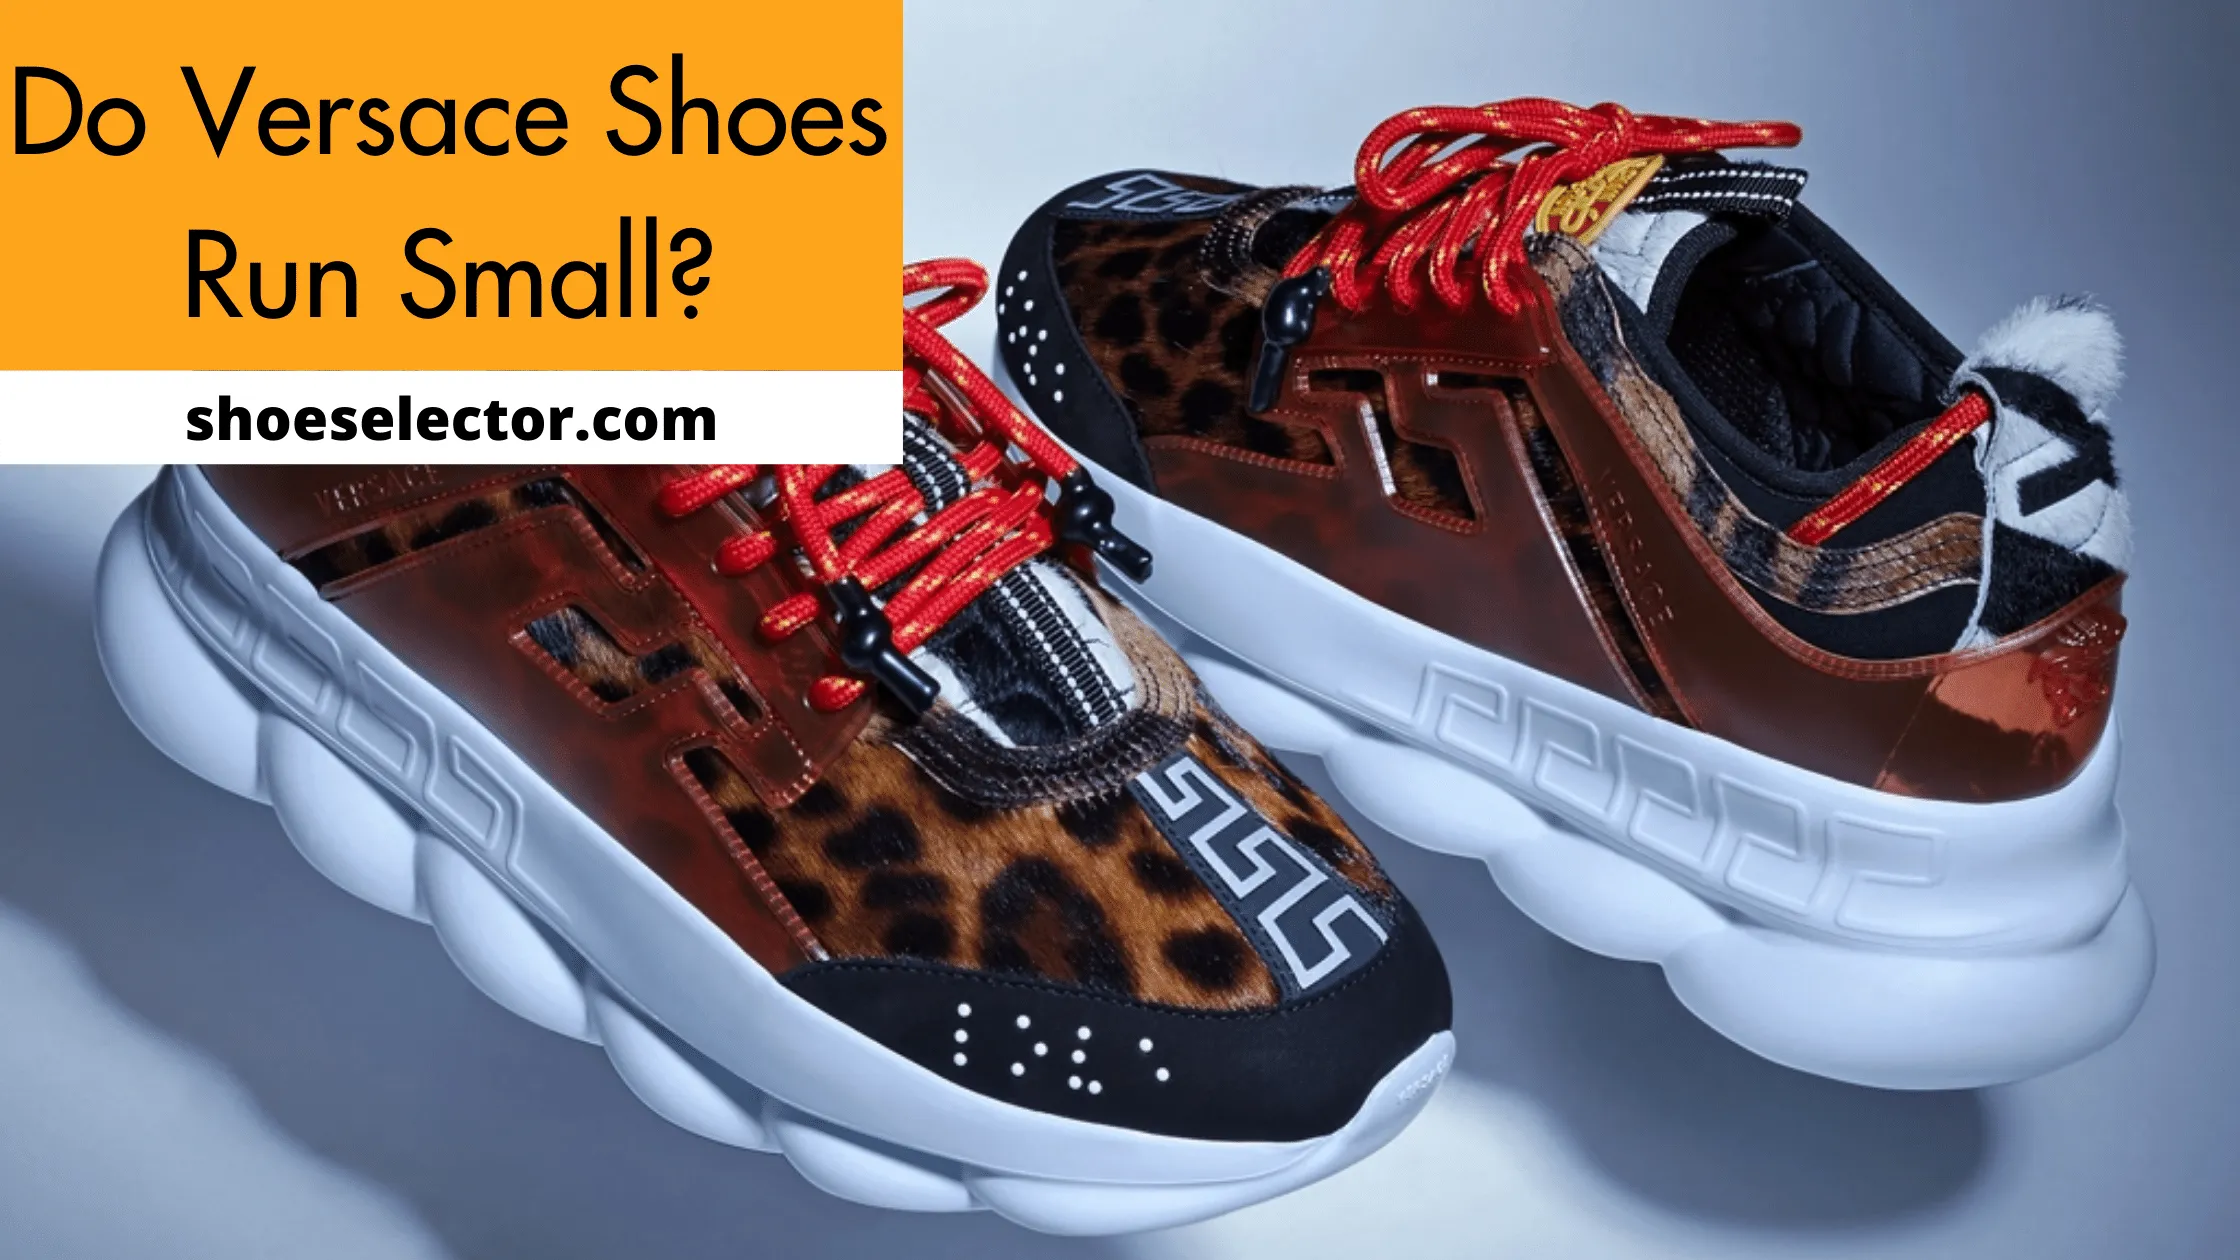 Do Versace Shoes Run Small? Complete Guide